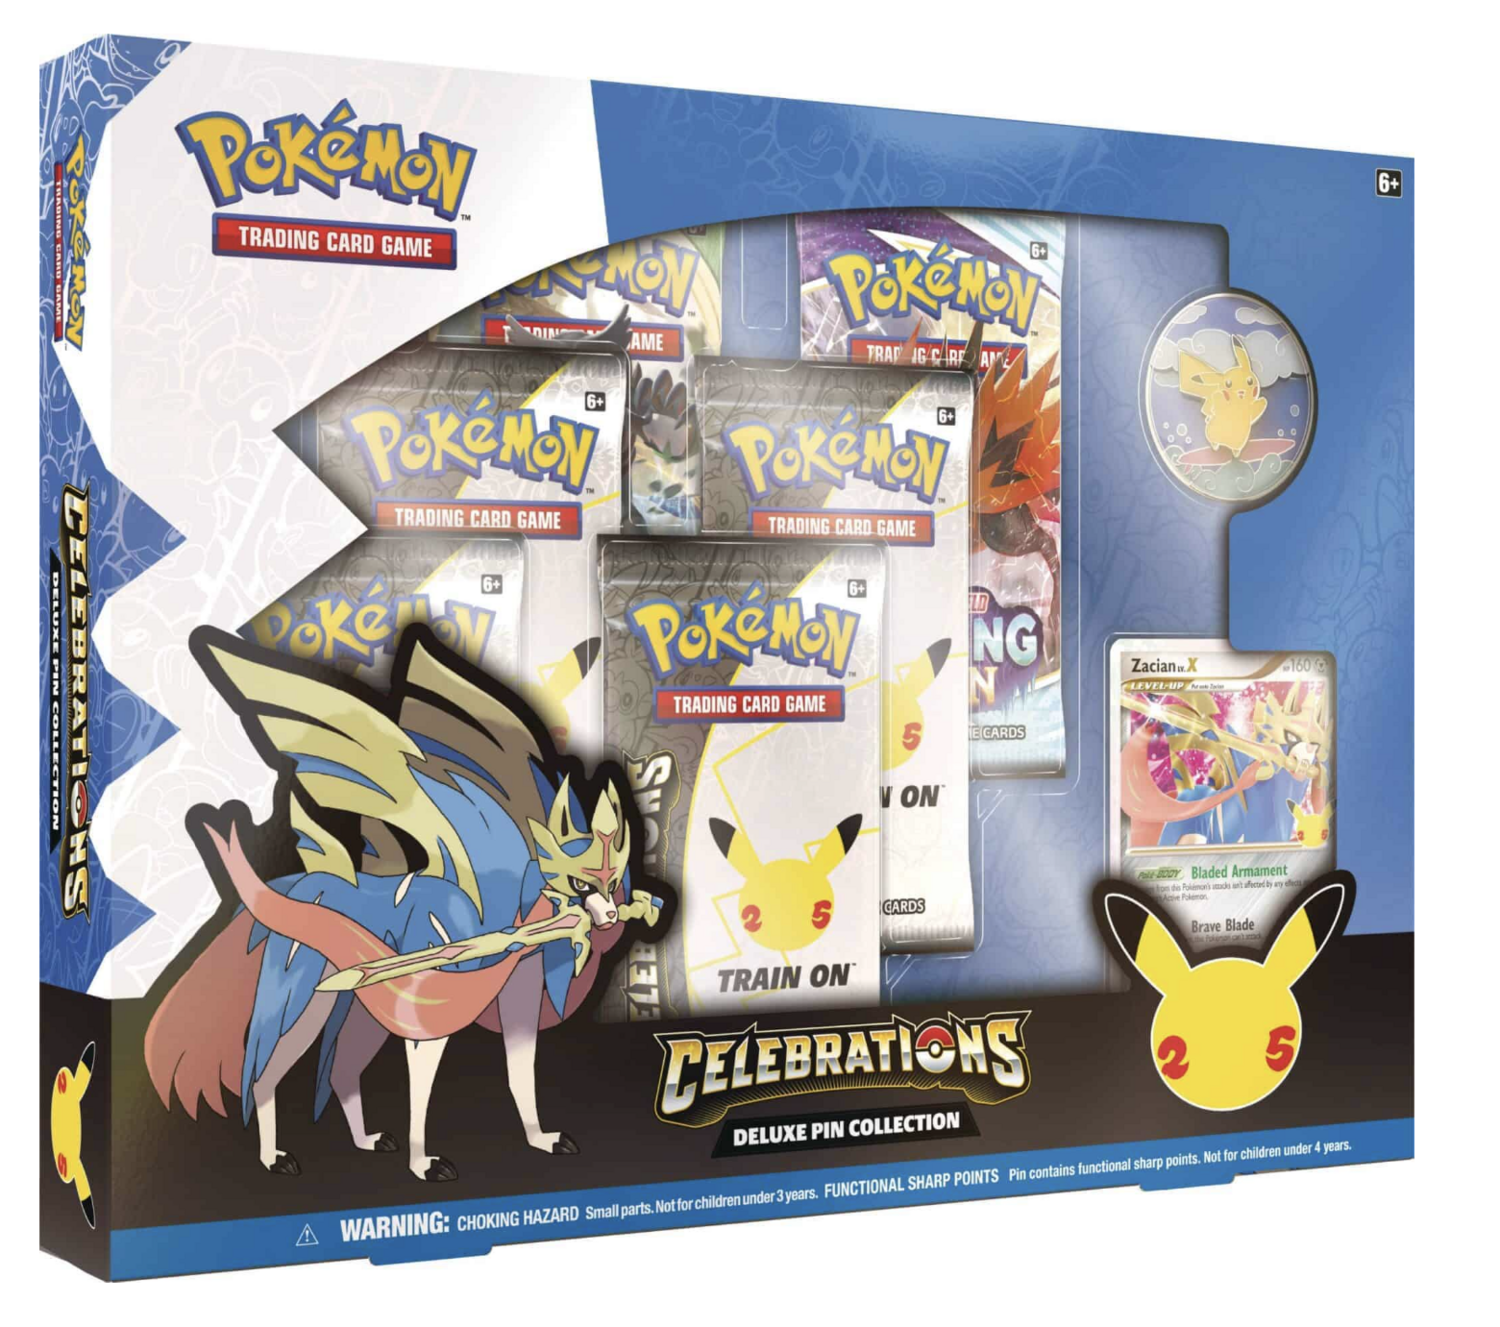 Pokémon Celebrations Deluxe Pin Collection (ENG)